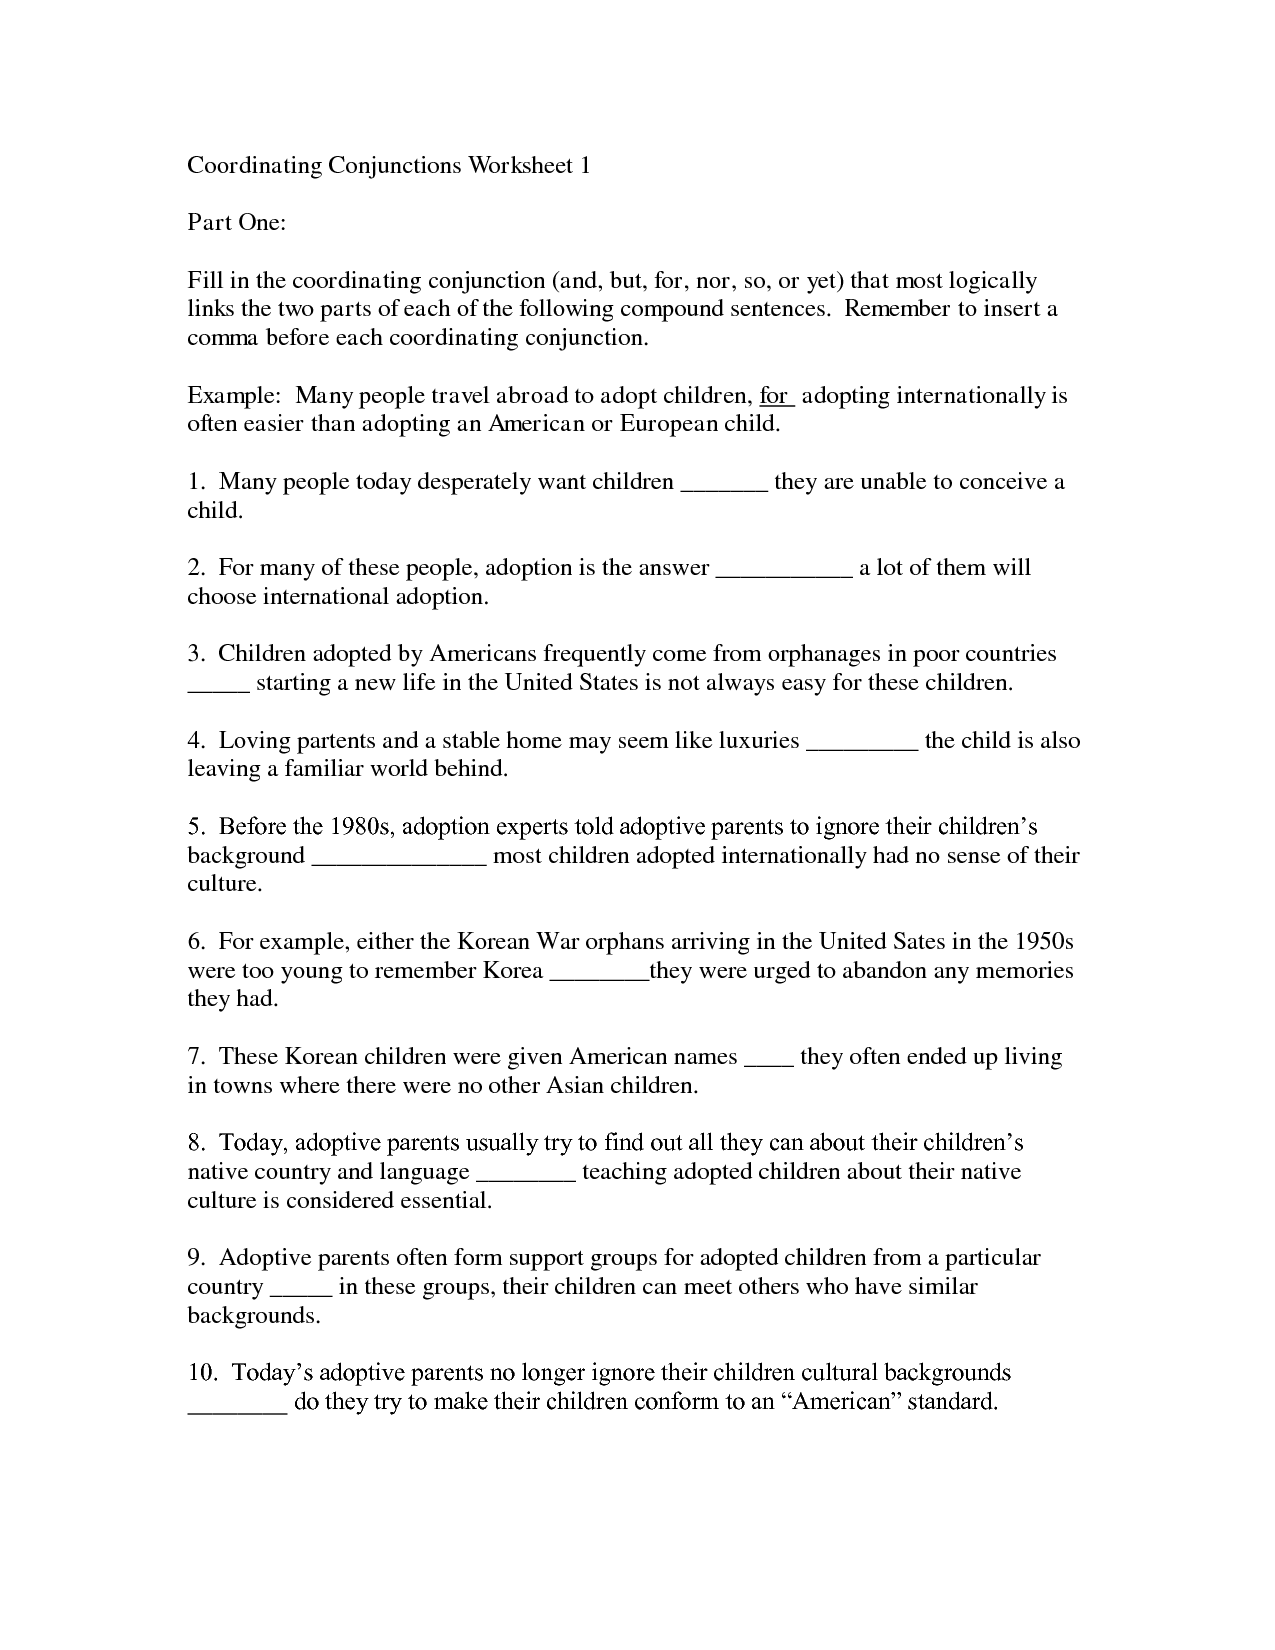 16-best-images-of-subordinating-conjunctions-with-commas-worksheets-coordinating-and-worksheet